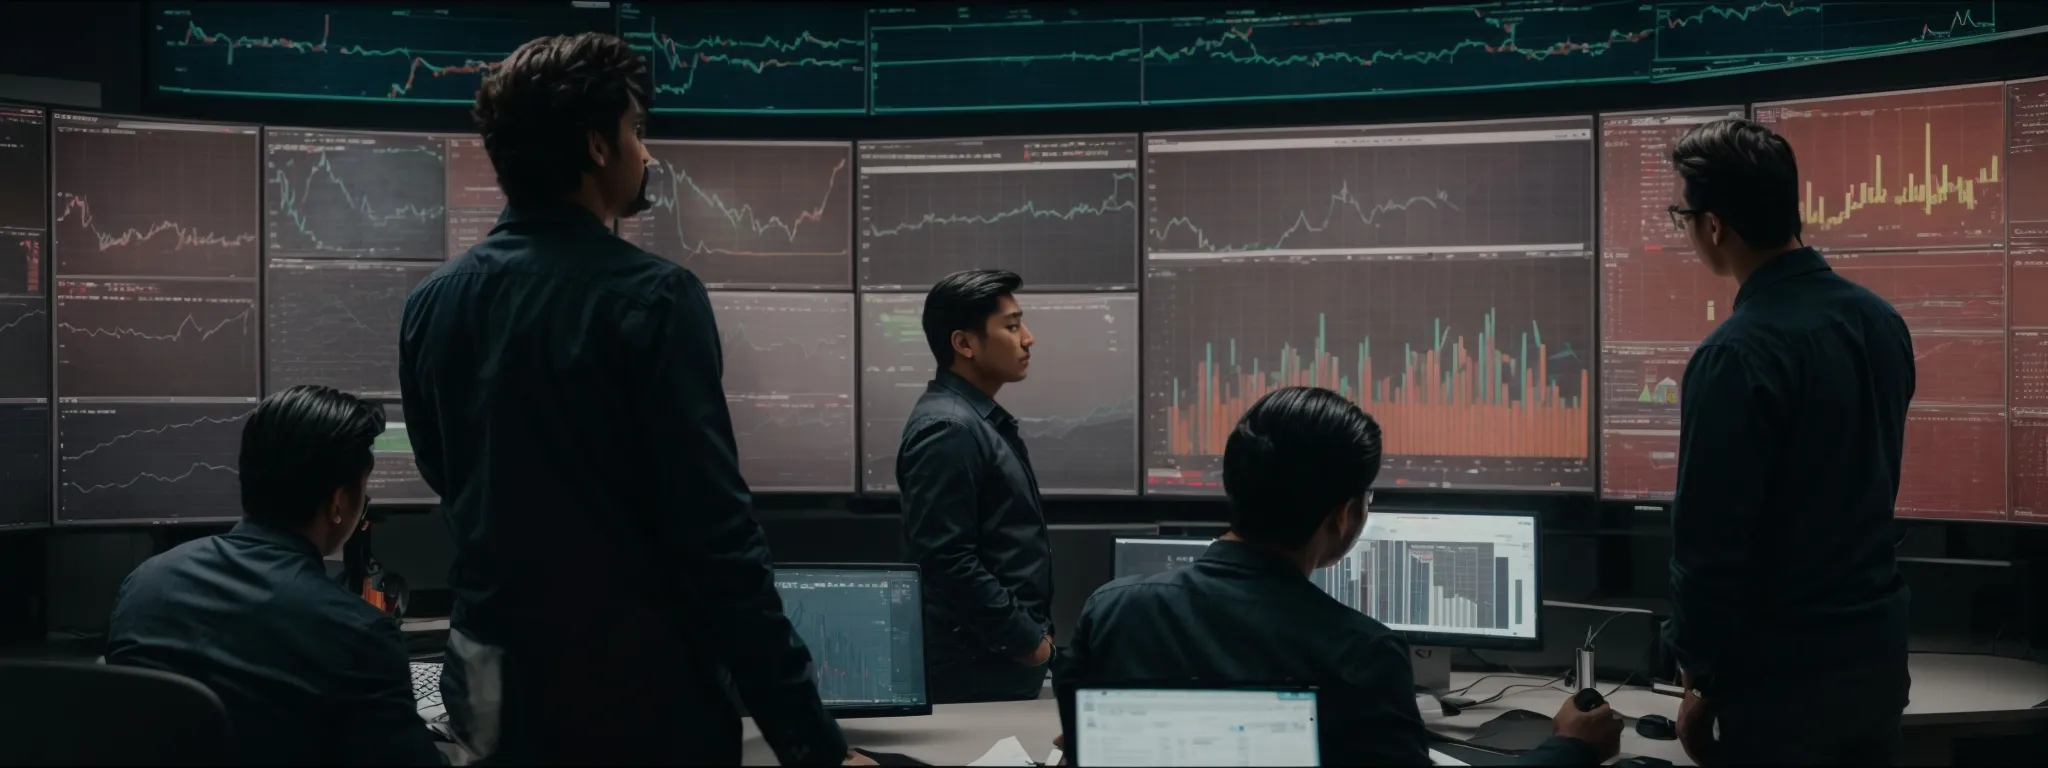 a group of professionals gathered around a large monitor, intently studying an analytics dashboard displaying various metrics and charts.